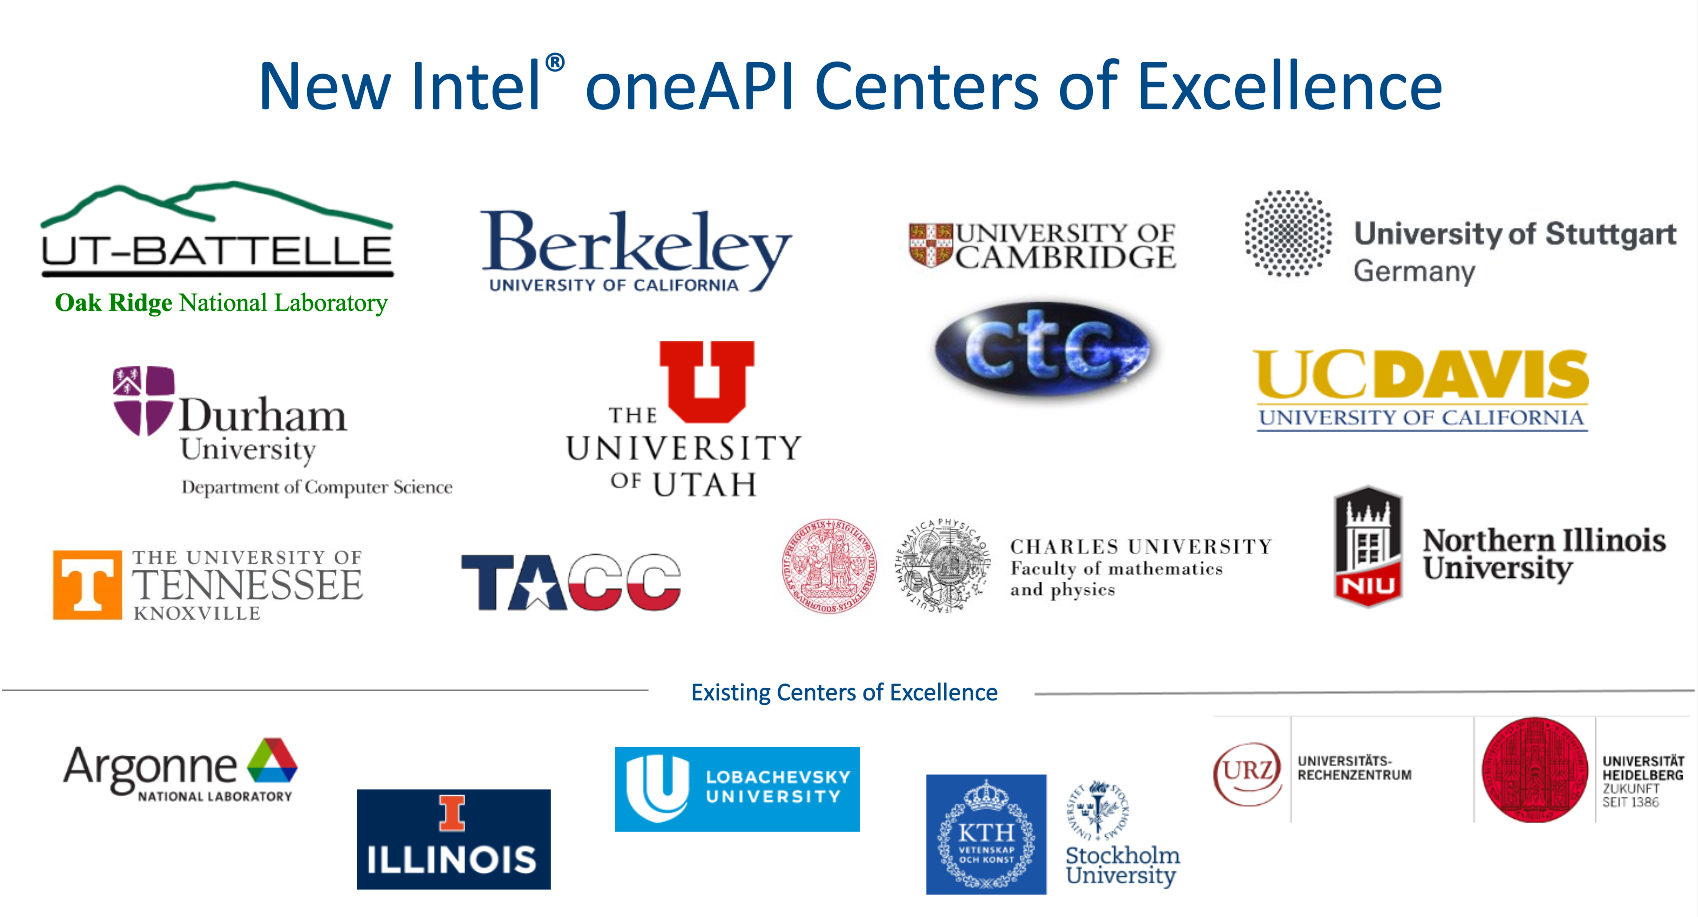 New Intel oneAPI Centers of Excellence